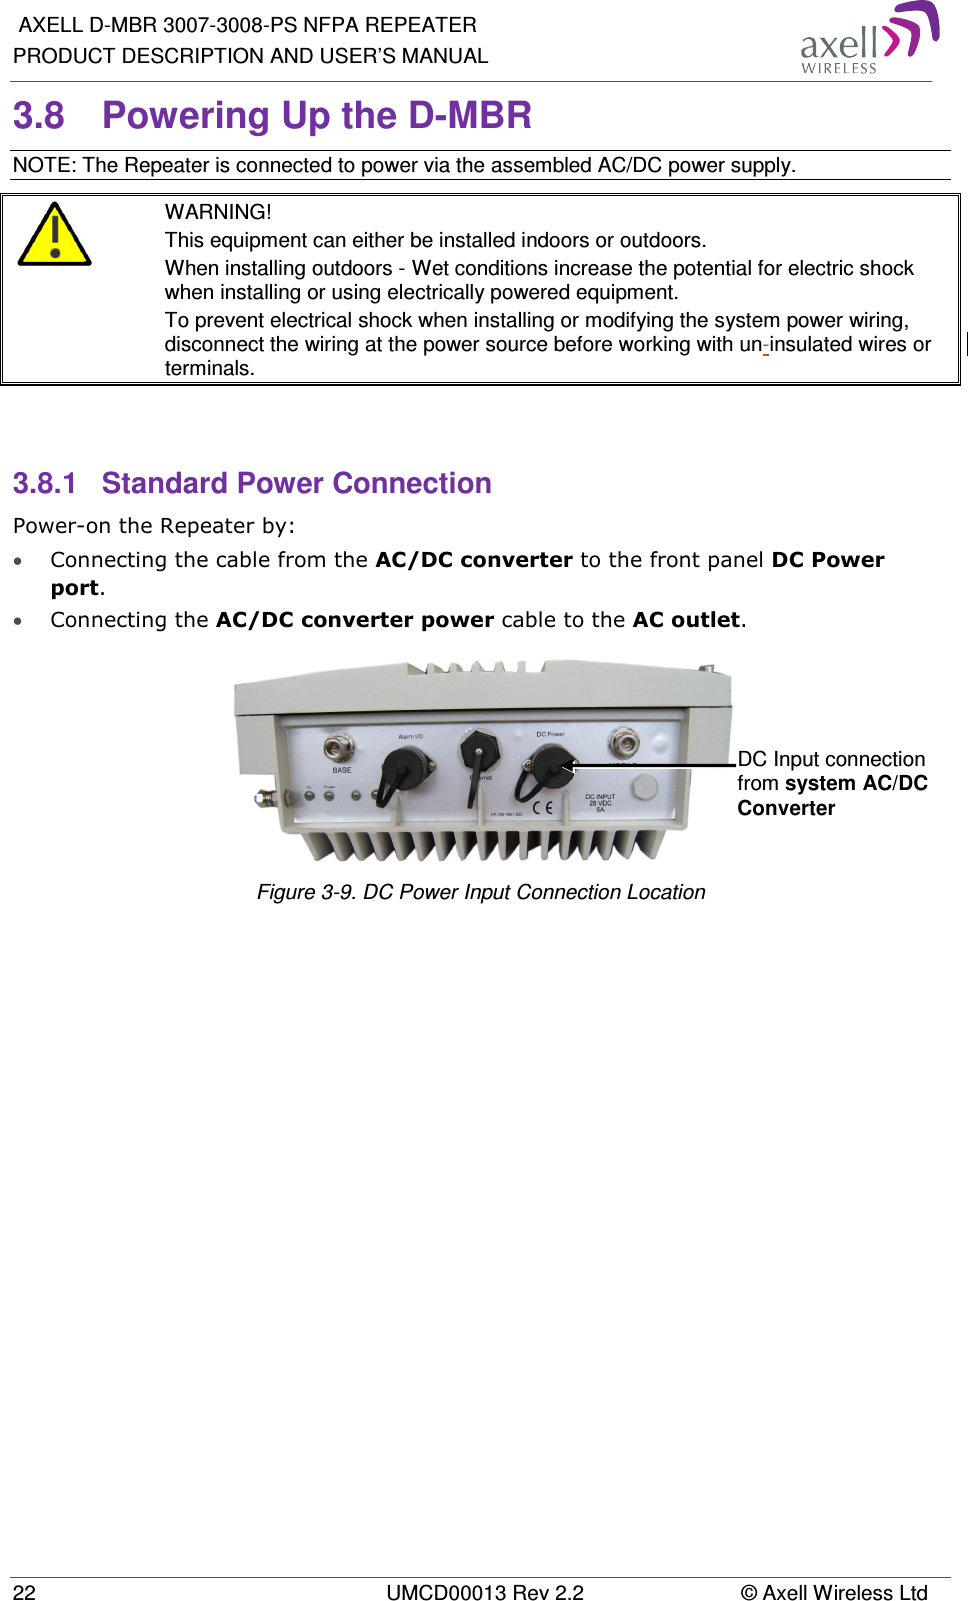  AXELL D-MBR 3007-3008-PS NFPA REPEATER PRODUCT DESCRIPTION AND USER’S MANUAL 22  UMCD00013 Rev 2.2  © Axell Wireless Ltd 3.8  Powering Up the D-MBR NOTE: The Repeater is connected to power via the assembled AC/DC power supply.  WARNING! This equipment can either be installed indoors or outdoors.  When installing outdoors - Wet conditions increase the potential for electric shock when installing or using electrically powered equipment.  To prevent electrical shock when installing or modifying the system power wiring, disconnect the wiring at the power source before working with un-insulated wires or terminals.   3.8.1  Standard Power Connection Power-on the Repeater by: • Connecting the cable from the AC/DC converter to the front panel DC Power port. • Connecting the AC/DC converter power cable to the AC outlet.    Figure  3-9. DC Power Input Connection Location   DC Input connection from system AC/DC Converter 